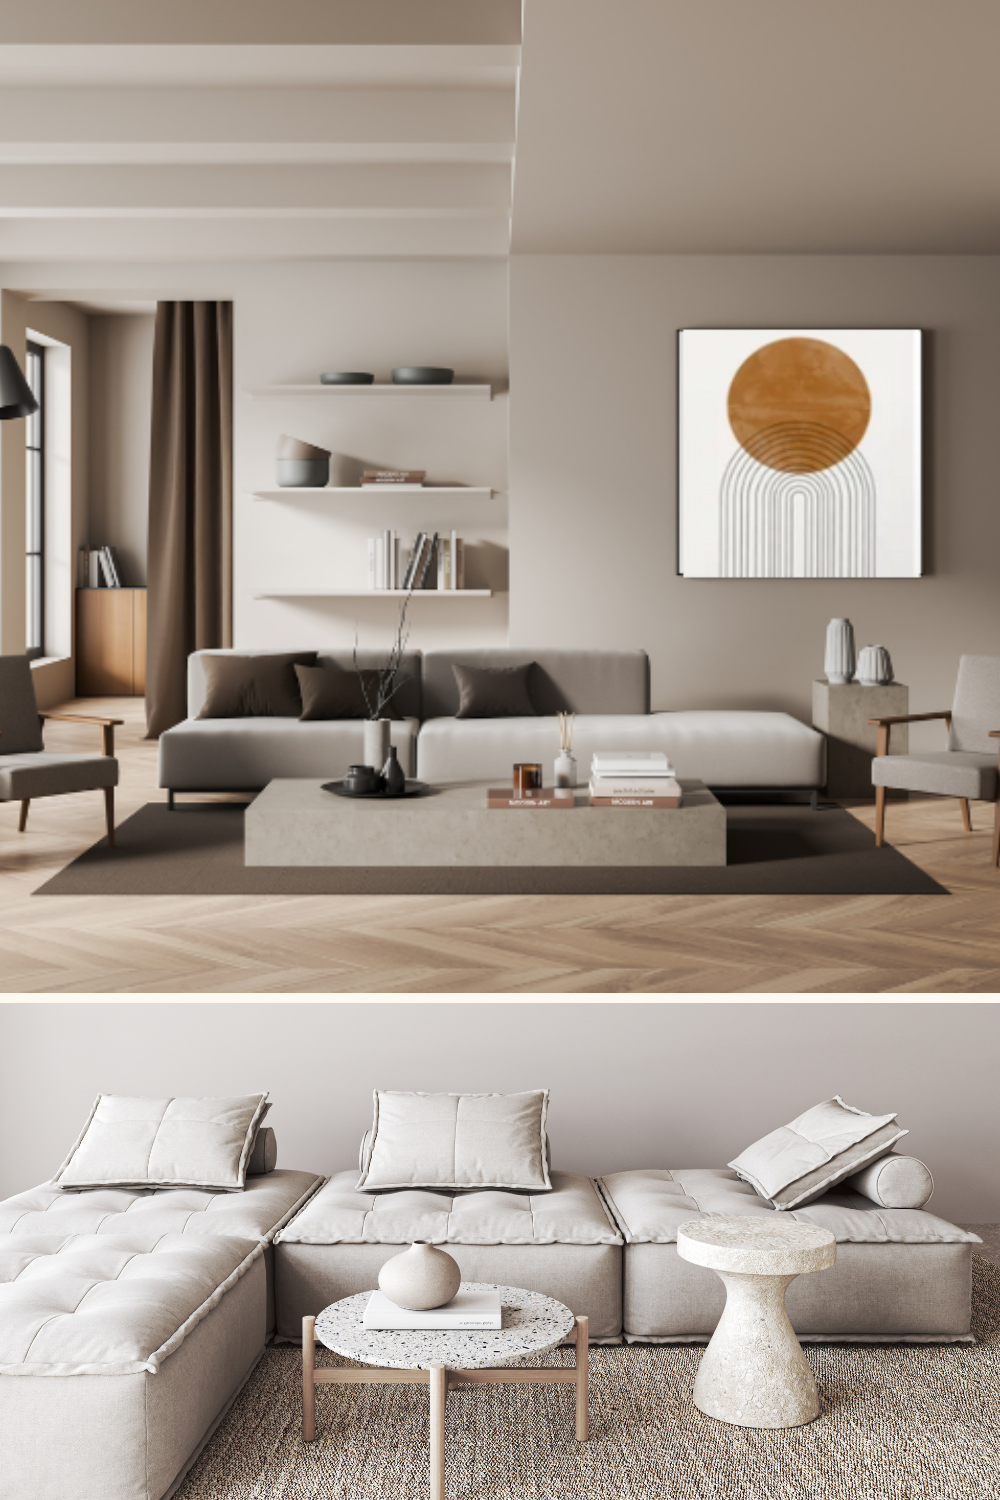 Embracing Simplicity: 11 Minimalist Interior Design Ideas to Elevate Your Space